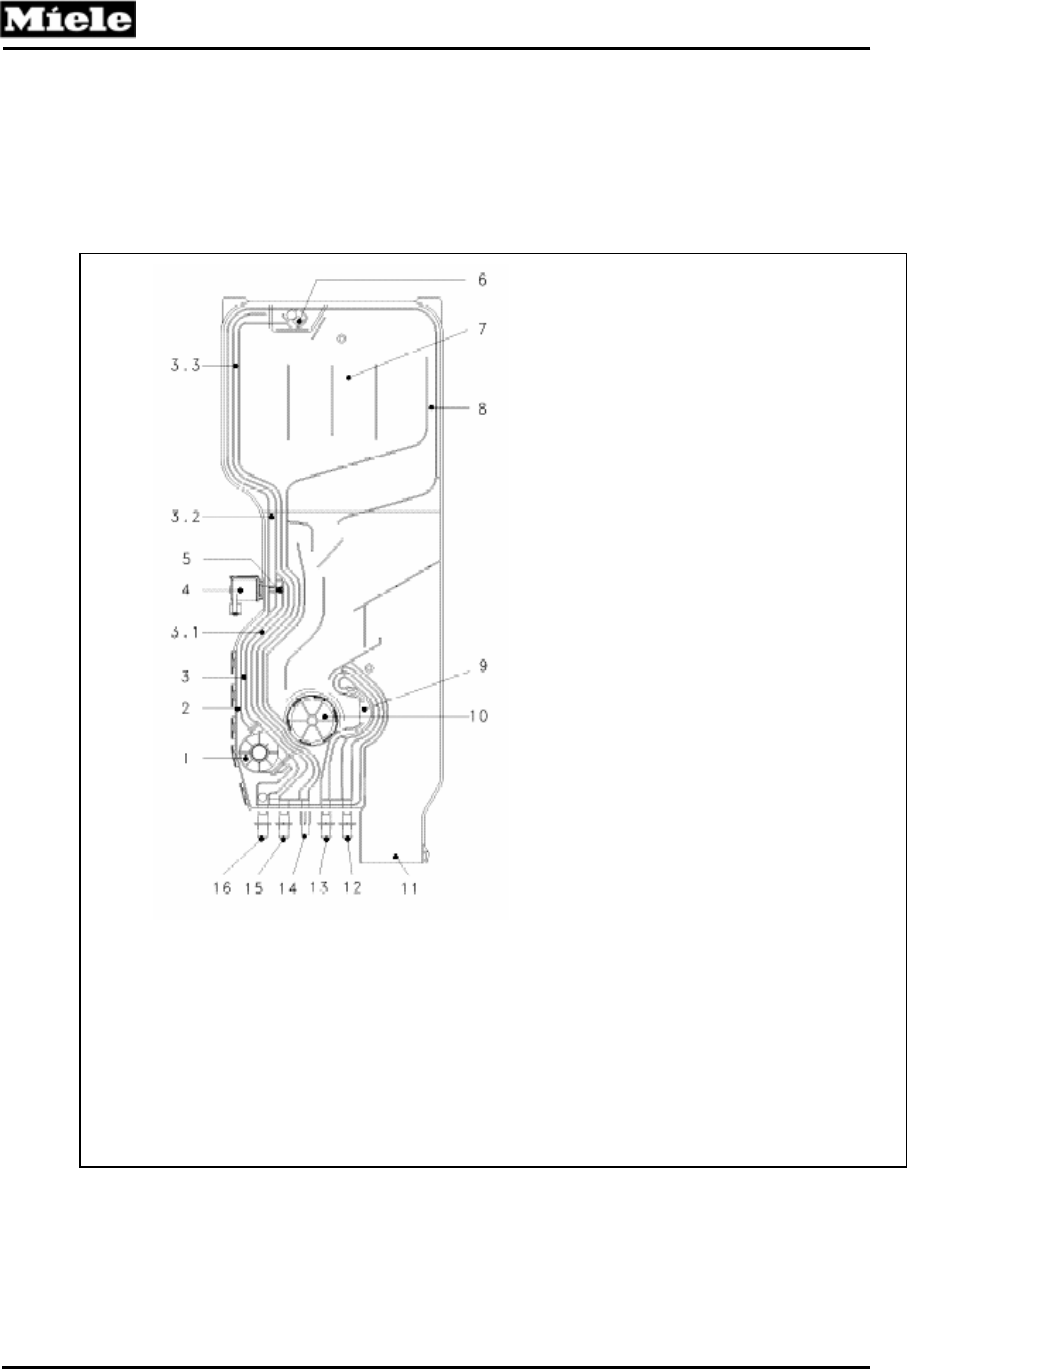 Page 40 of Miele Dishwasher G600 User Guide | ManualsOnline.com  Miele B3 4 Water Flow Meter Wiring Diagram    Kitchen Appliance Manuals - Manuals Online